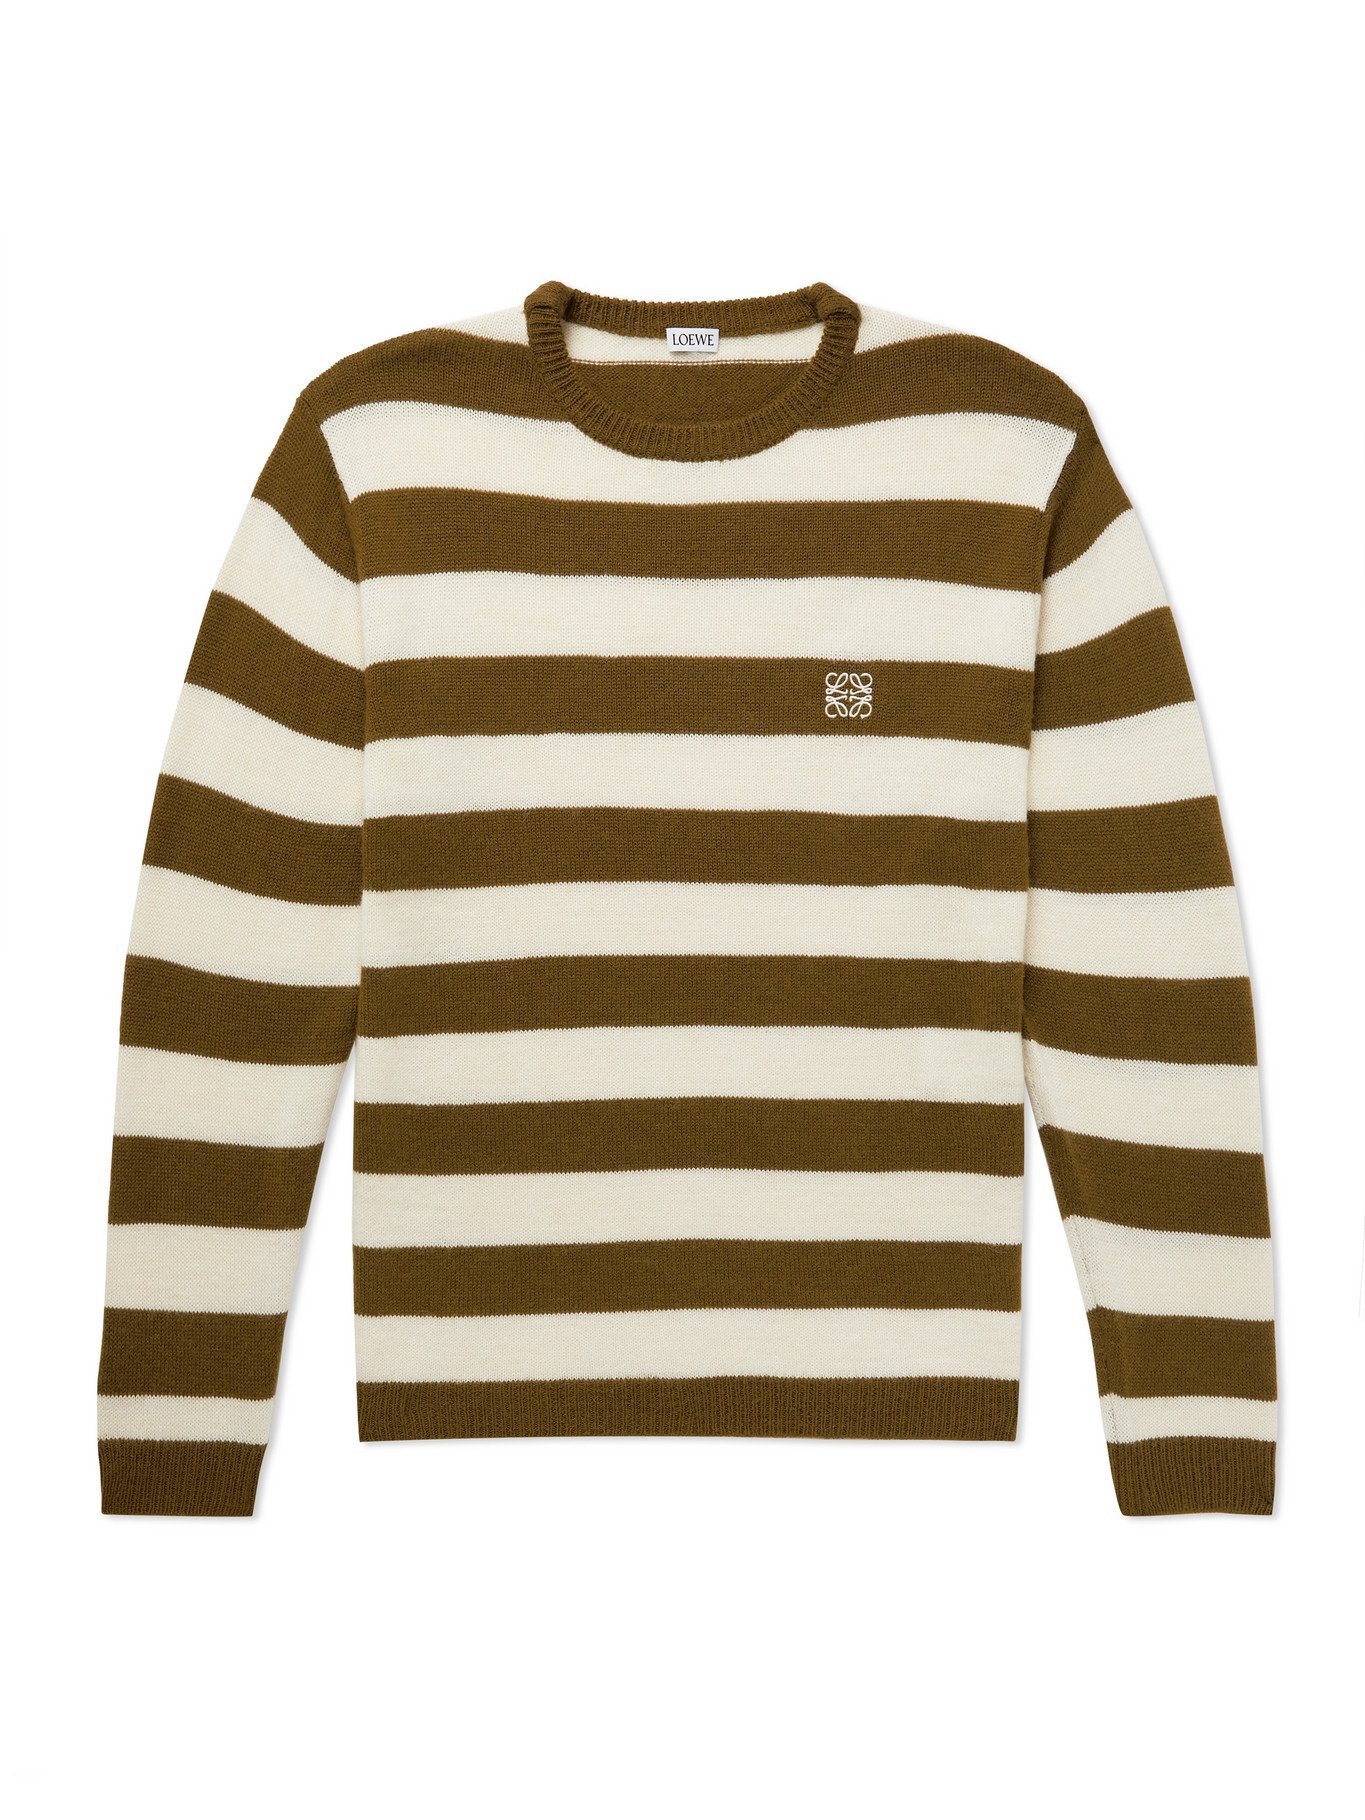 LOEWE - Logo-Embroidered Striped Knitted Sweater - Neutrals Loewe